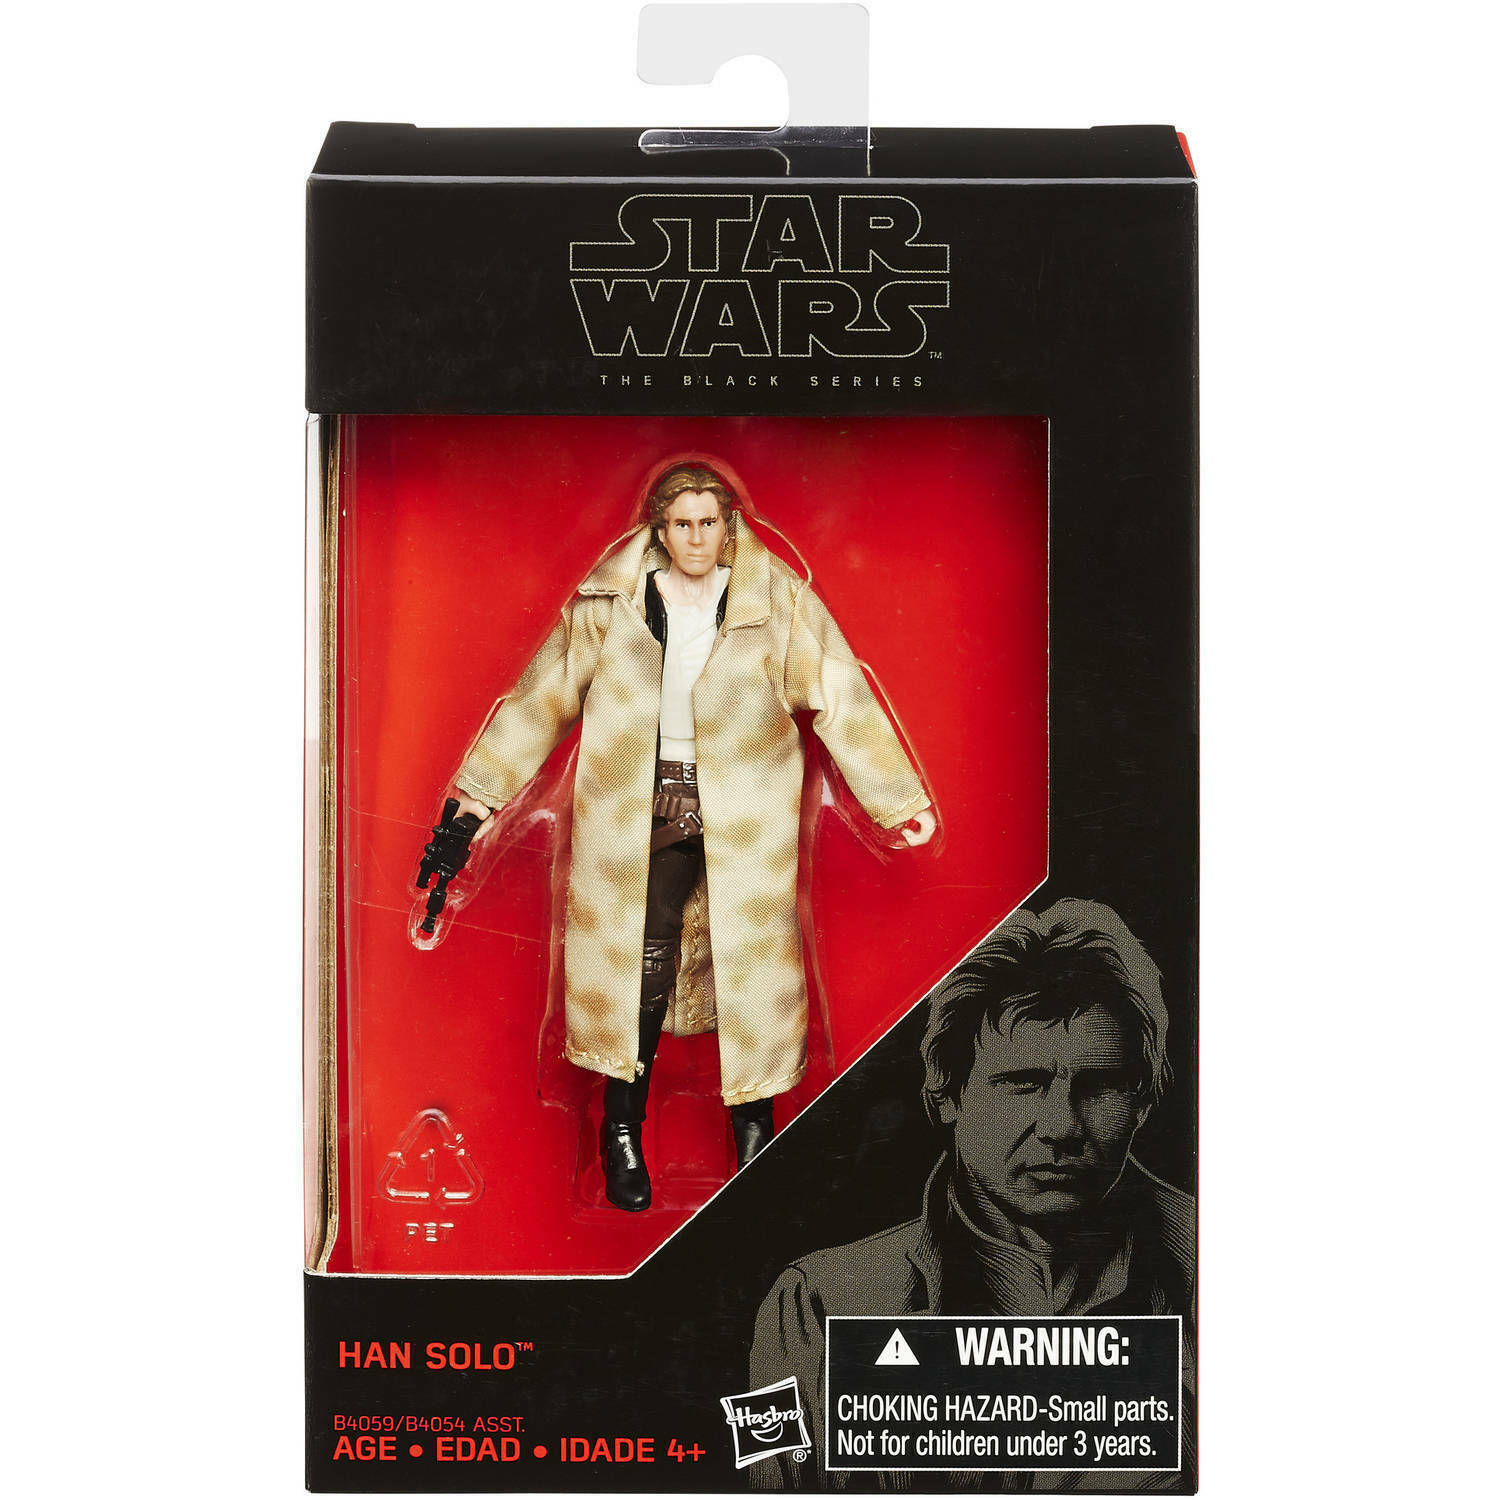 Primary image for Star Wars The Black Series 3.75" Action Figure - Han Solo WALMART EXCLUSIVE